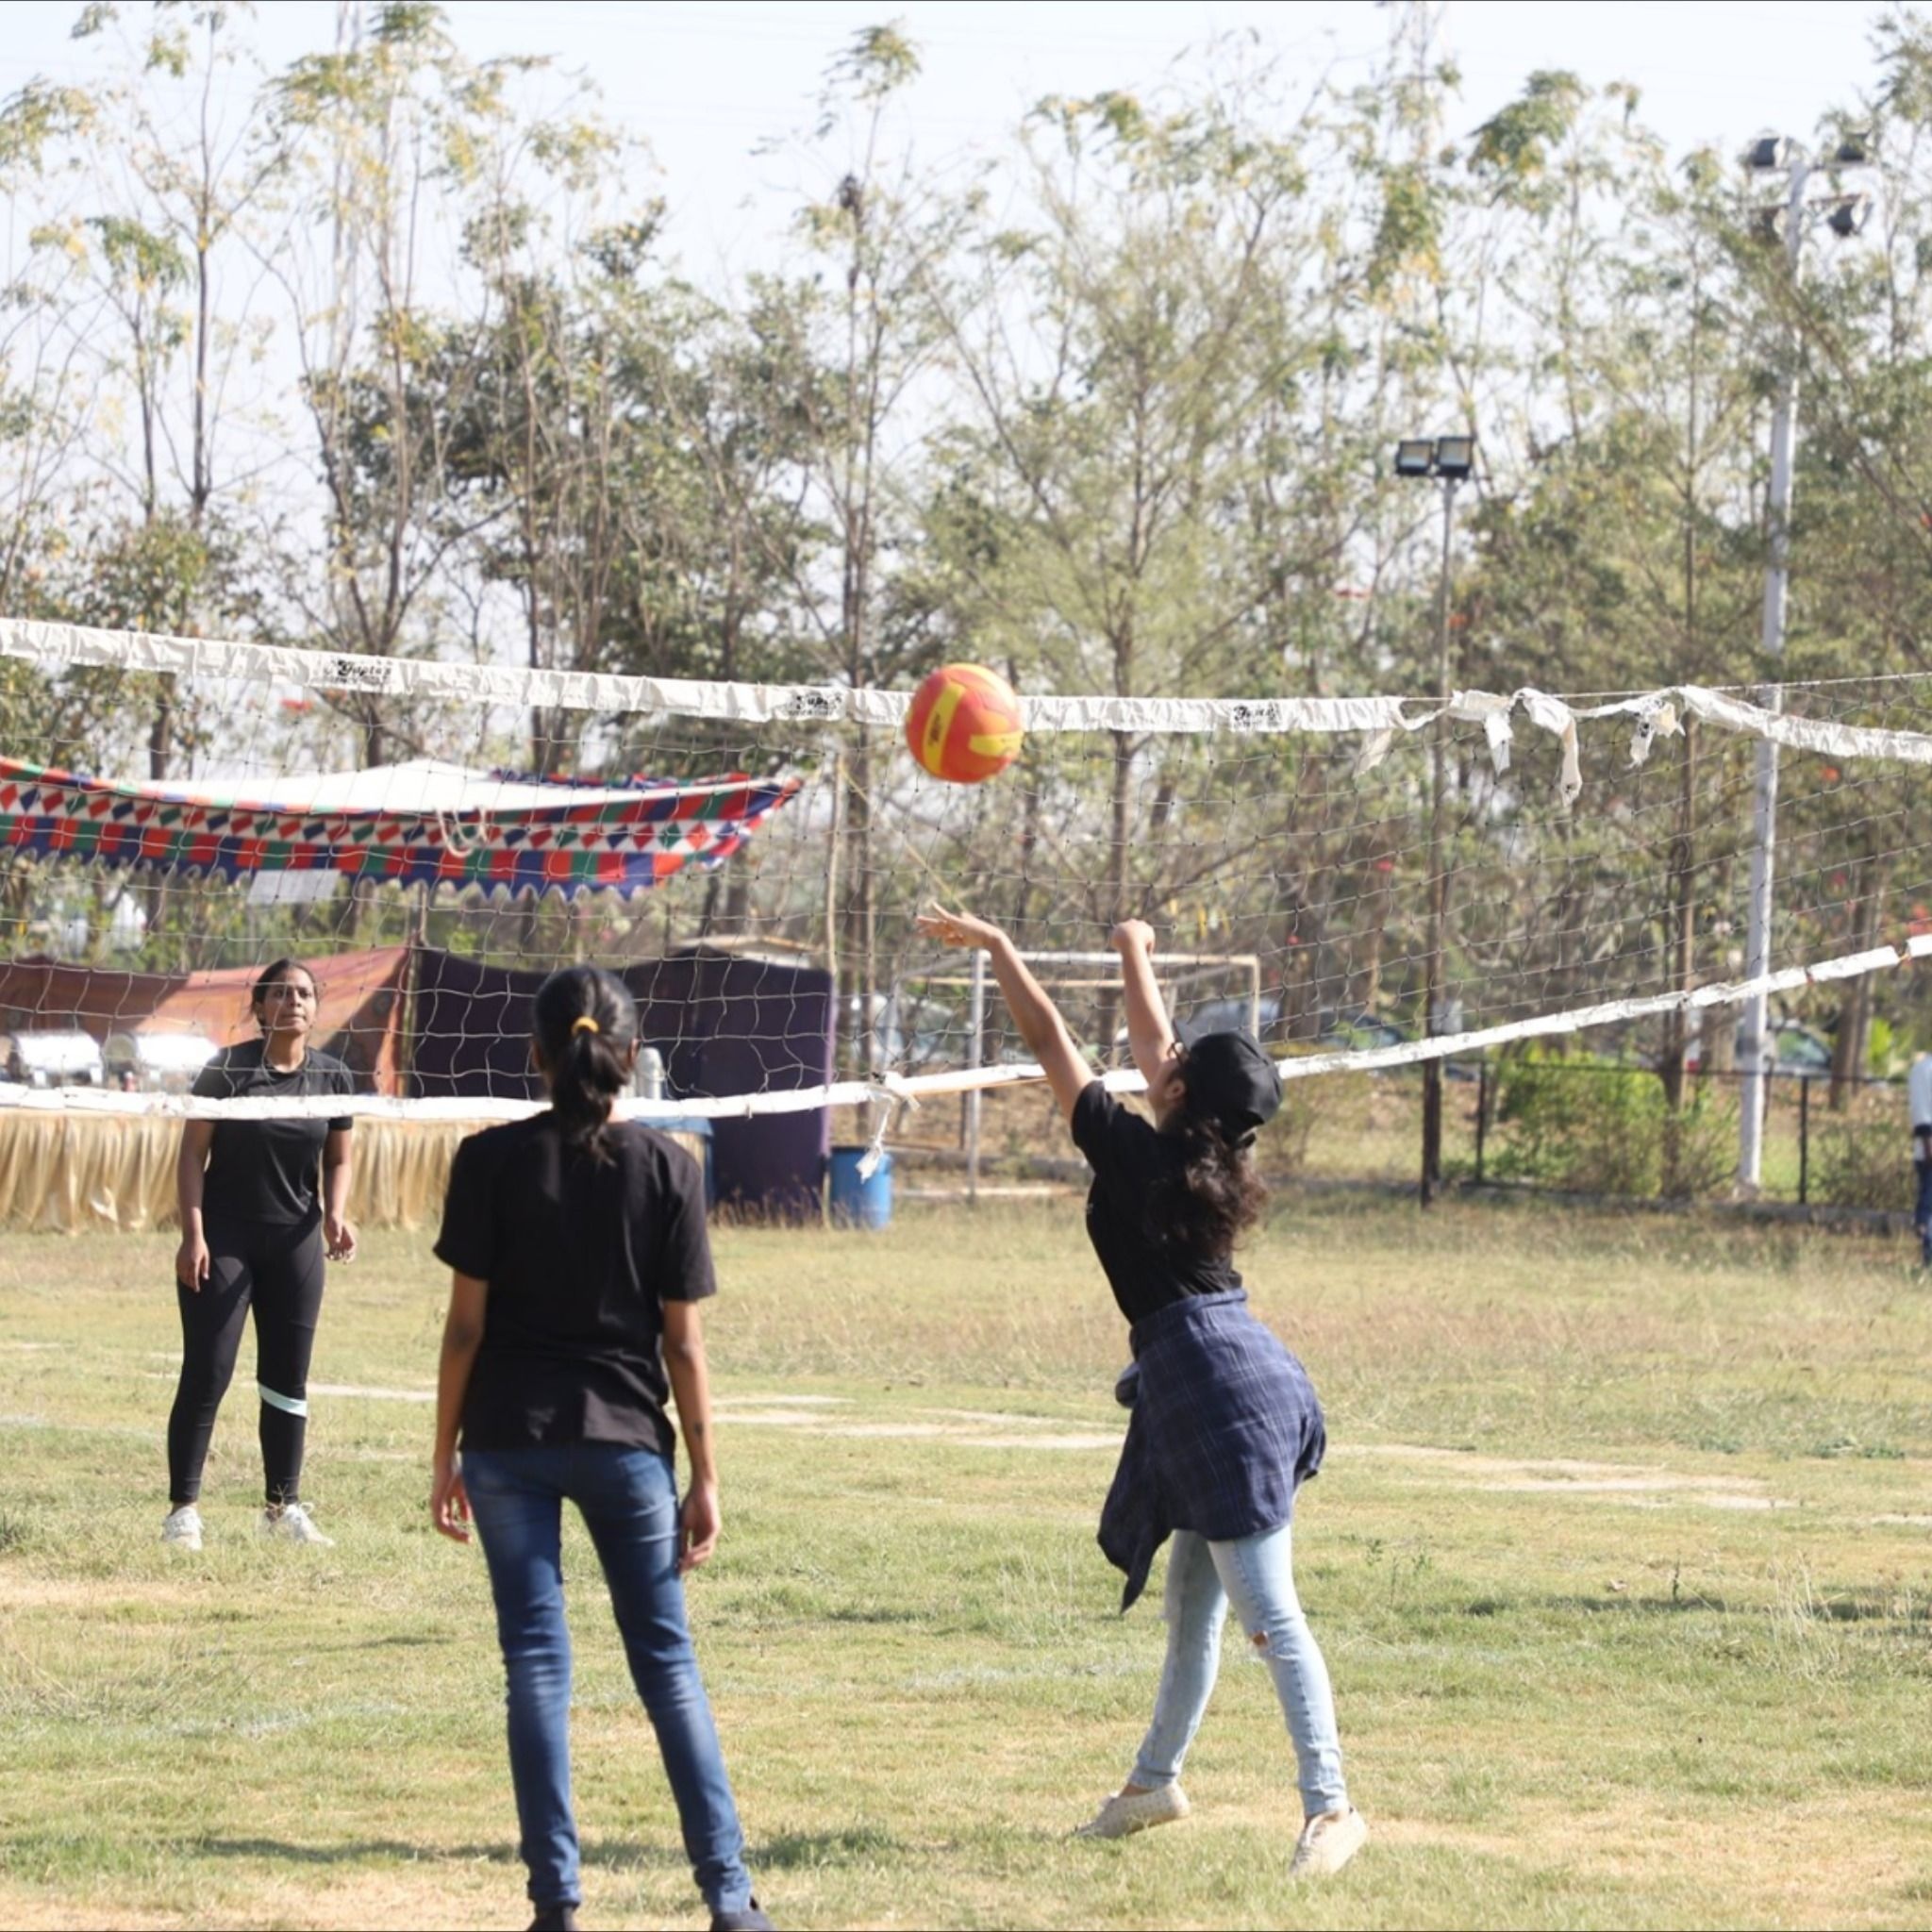 Throwball: Throwball Game, Women's Sports, Court For Amateurs and Beginners, Throwball Ideas. 2050x2050 HD Wallpaper.